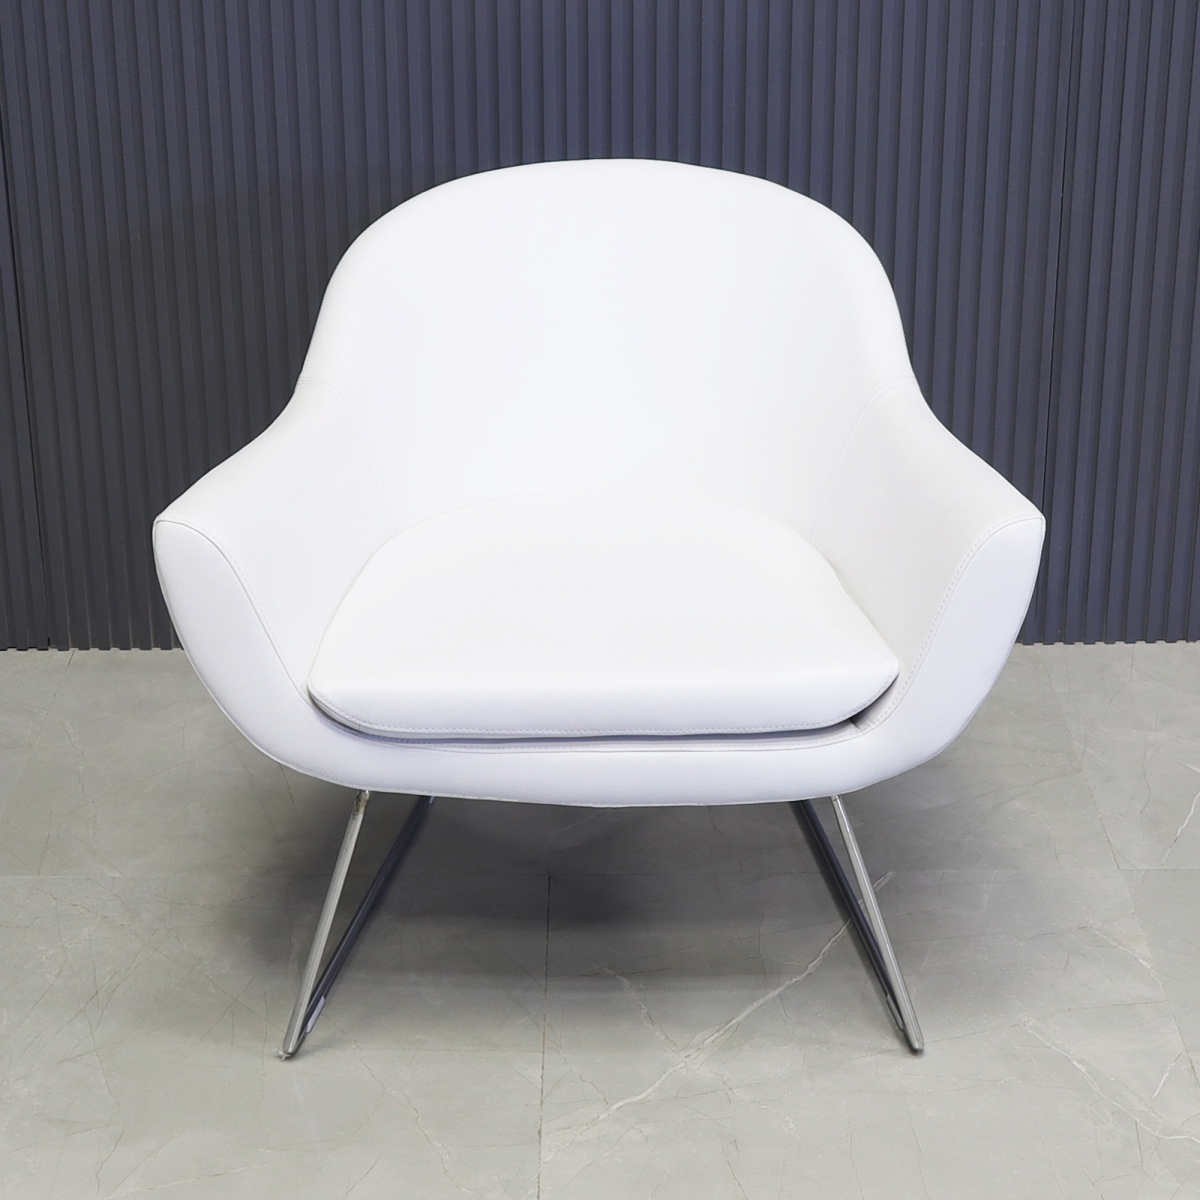 Set of Two White Leatherette Lounge Chairs and One FREE Norfolk Round Lobby Side Table - Stock